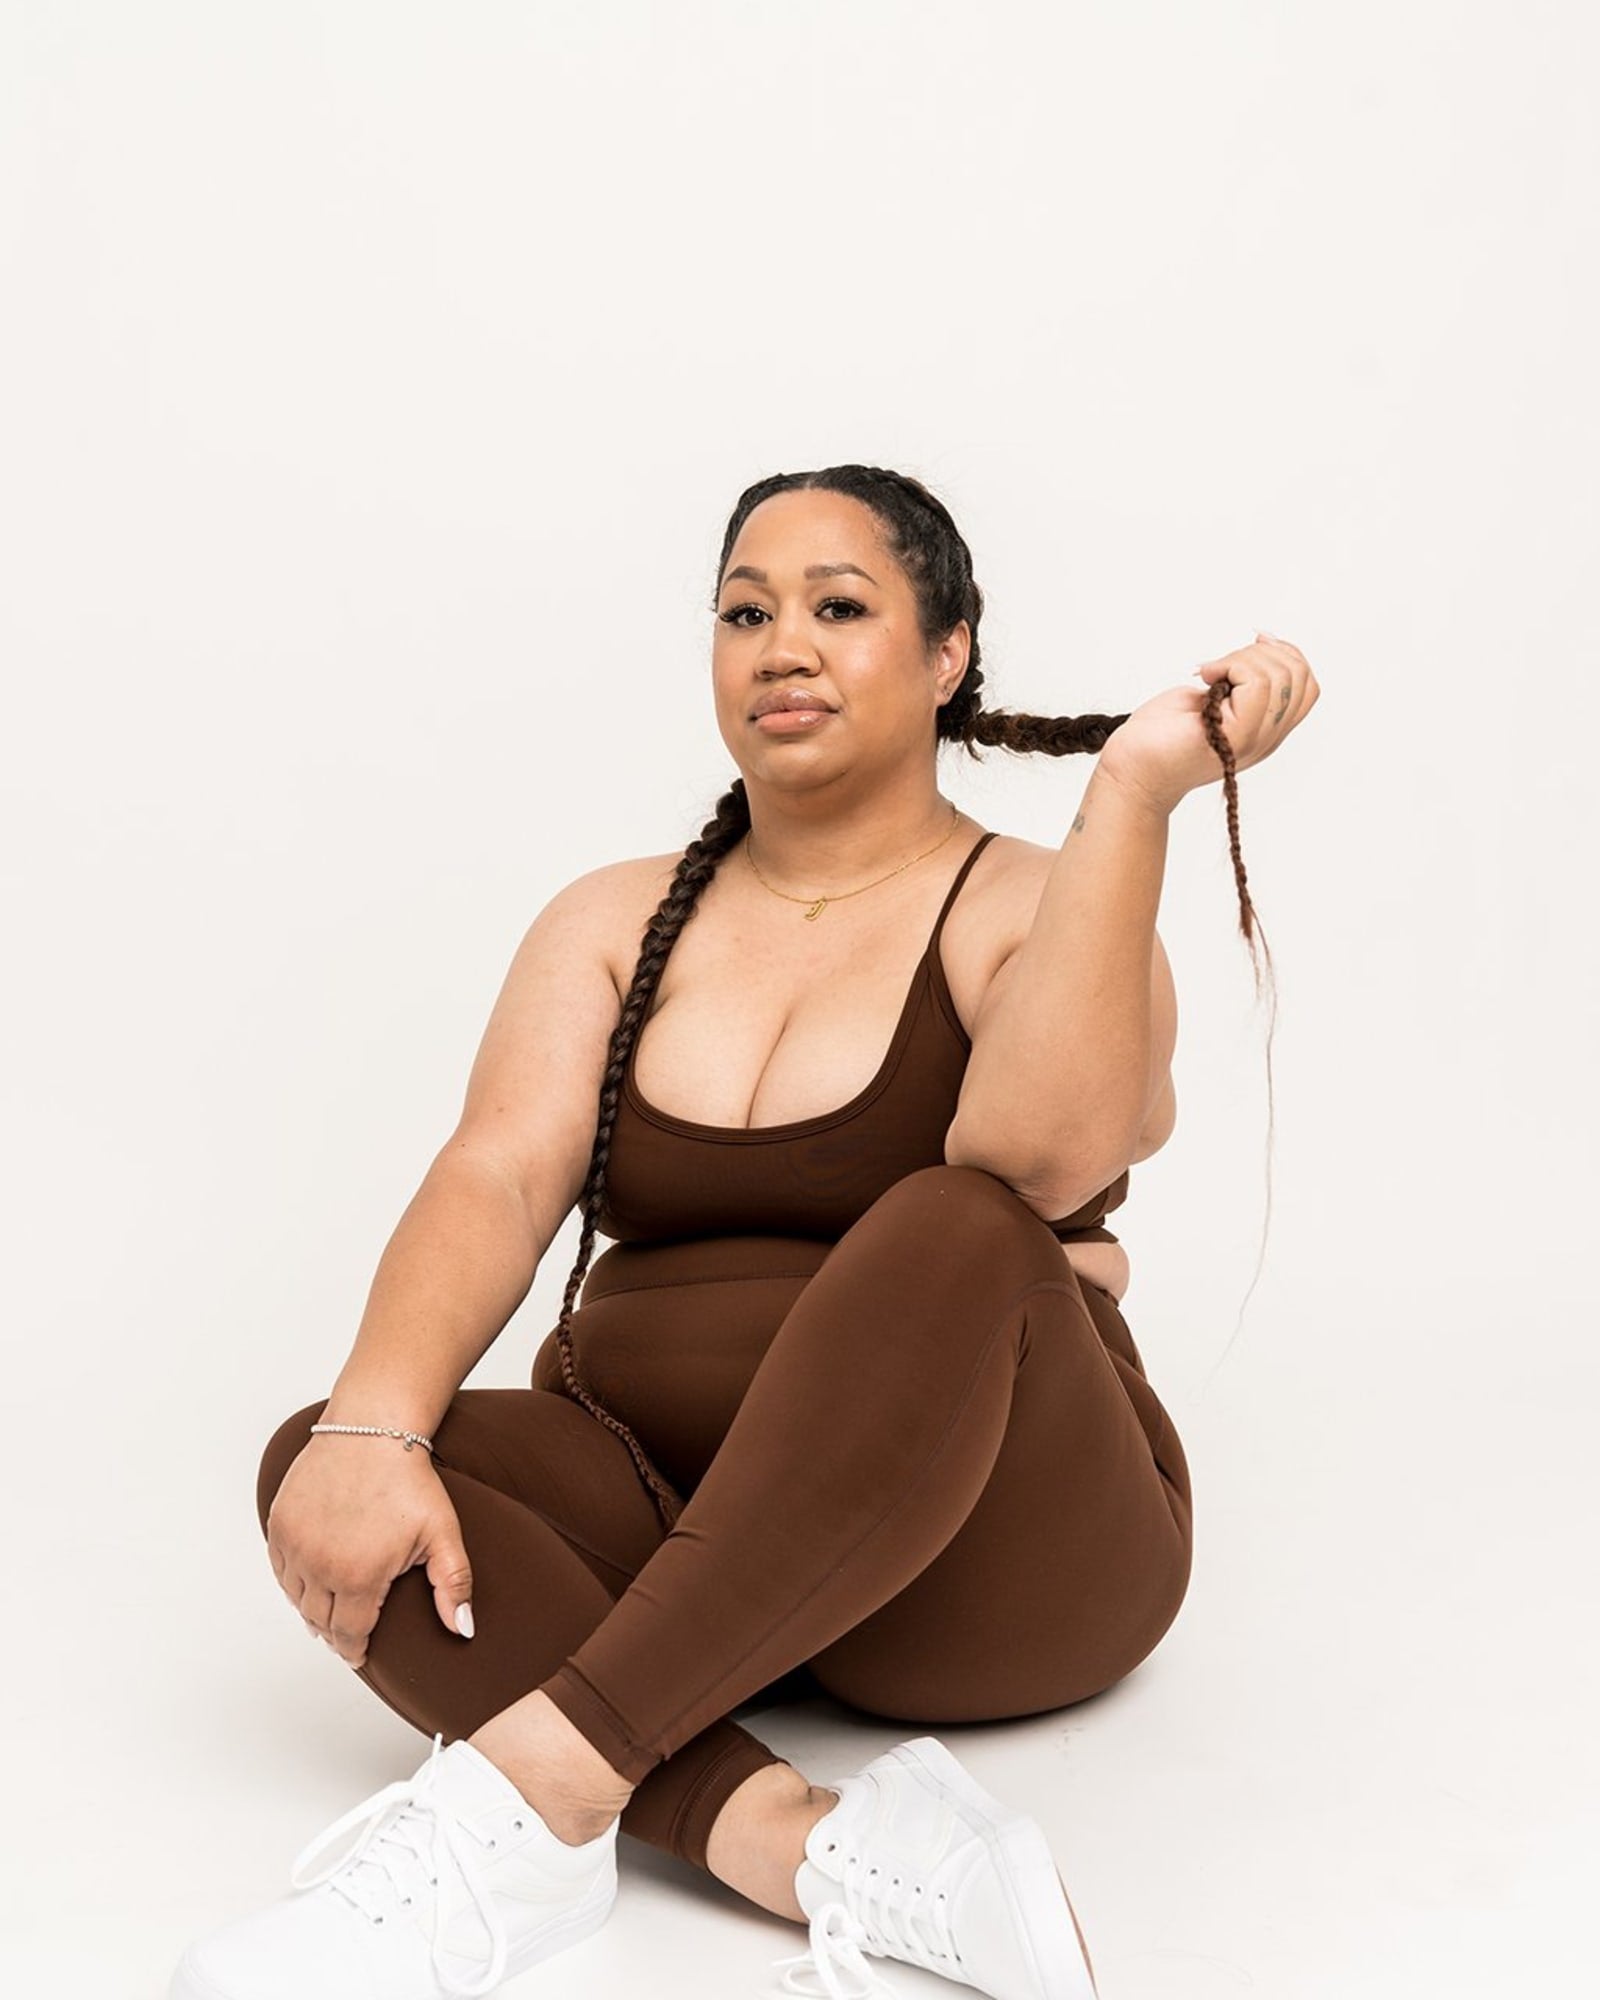 Plus Size Fitness Clothing To Sport At The Gym & Beyond - Chatelaine